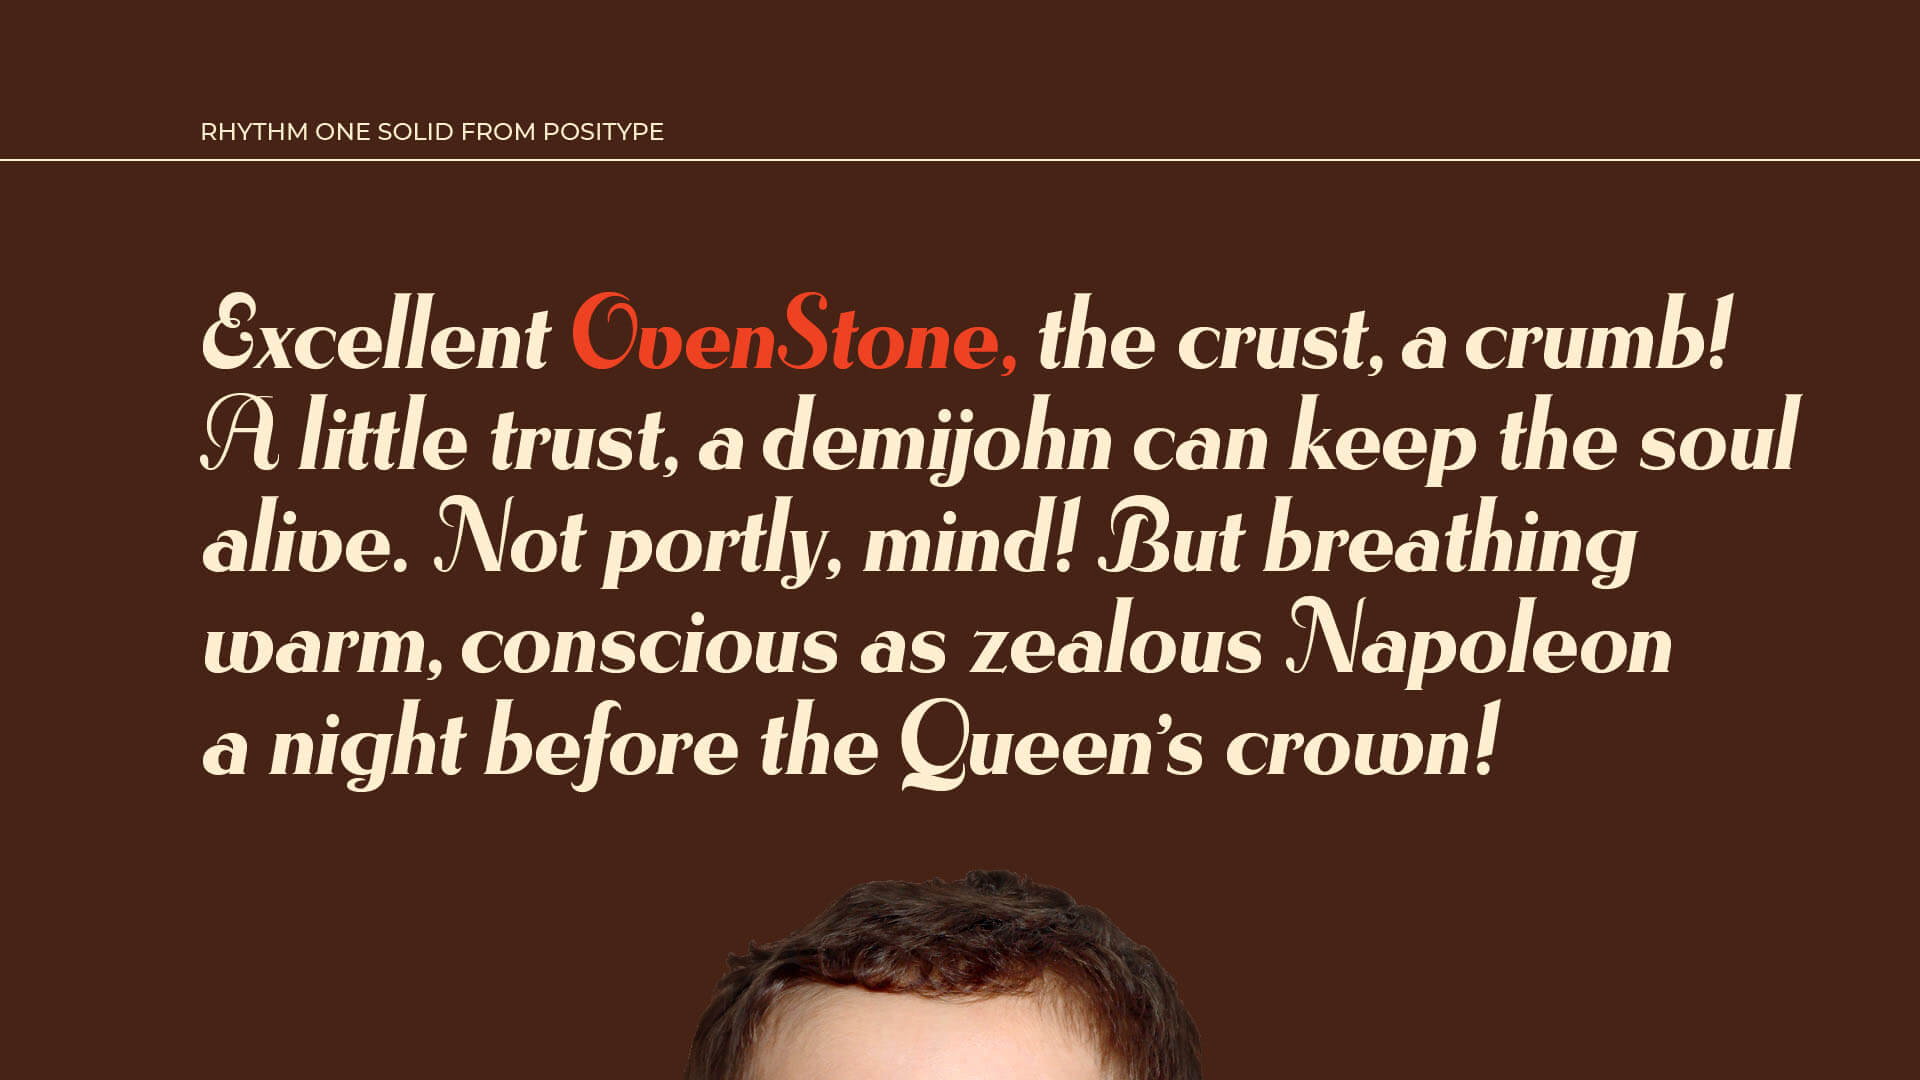 Rhythm One Solid Type Specimen Pangram: Excellent OvenStone, the crust, a crumb! A little trust, a demijohn can keep the soul alive. Not portly, mind! But breathing warm, conscious as zealous Napoleona night before the Queen’s crown!